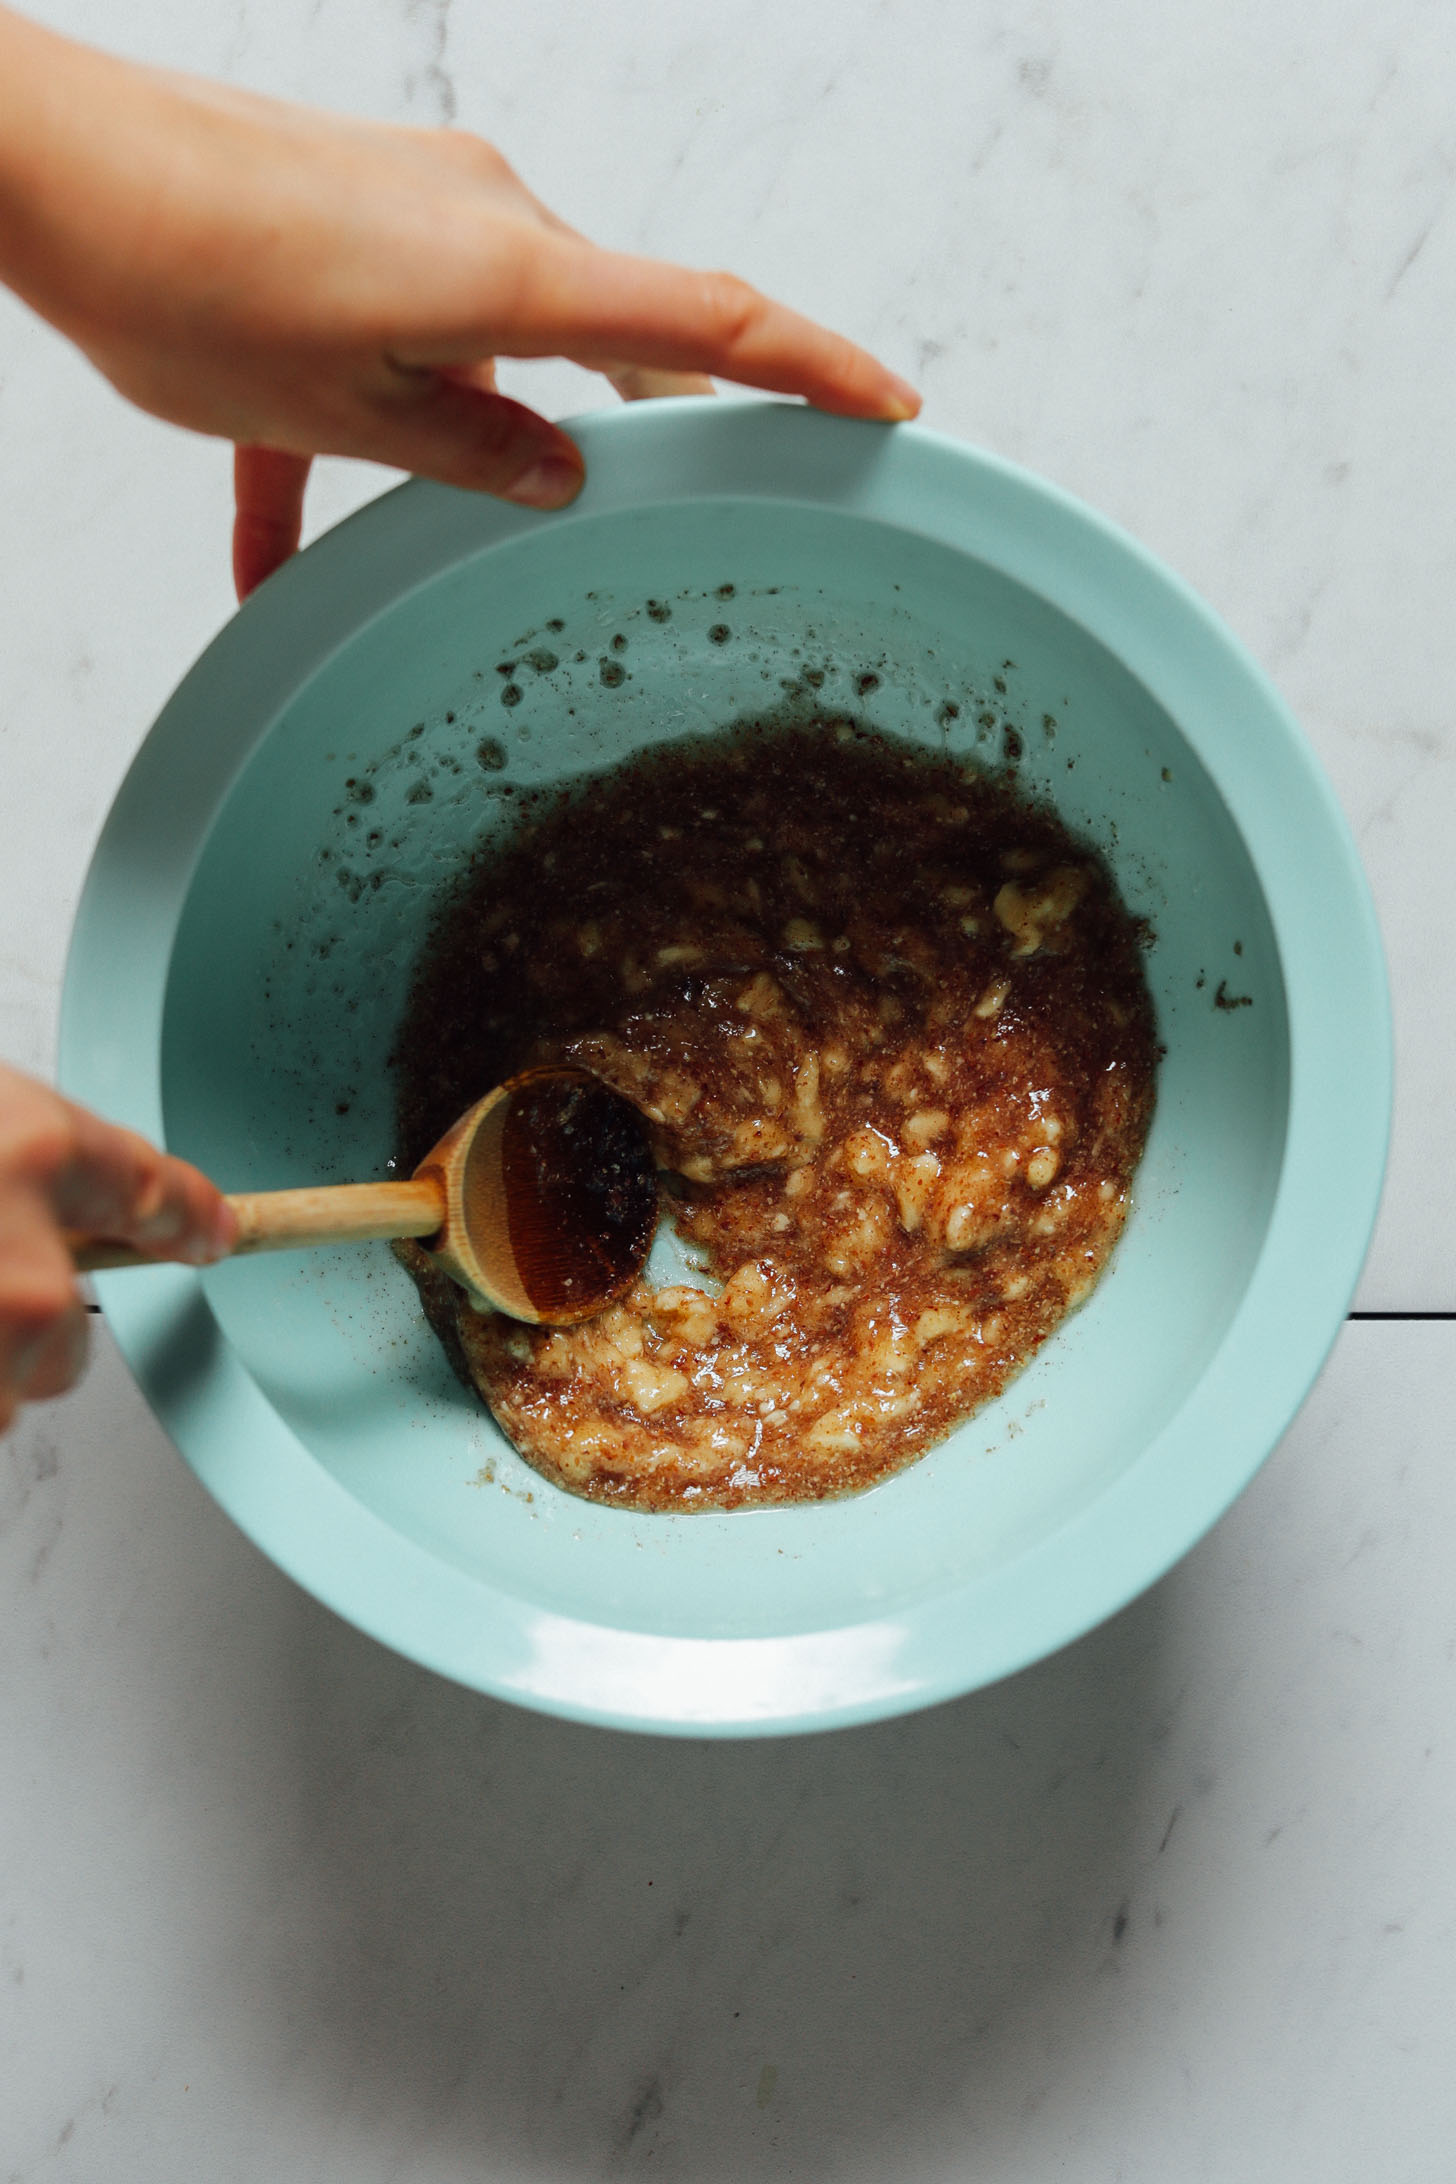 Overhead image of ripe banana mixed with flax seed, maple syrup, and oil in a blue bowl with a wooden spoon stirring the mixture